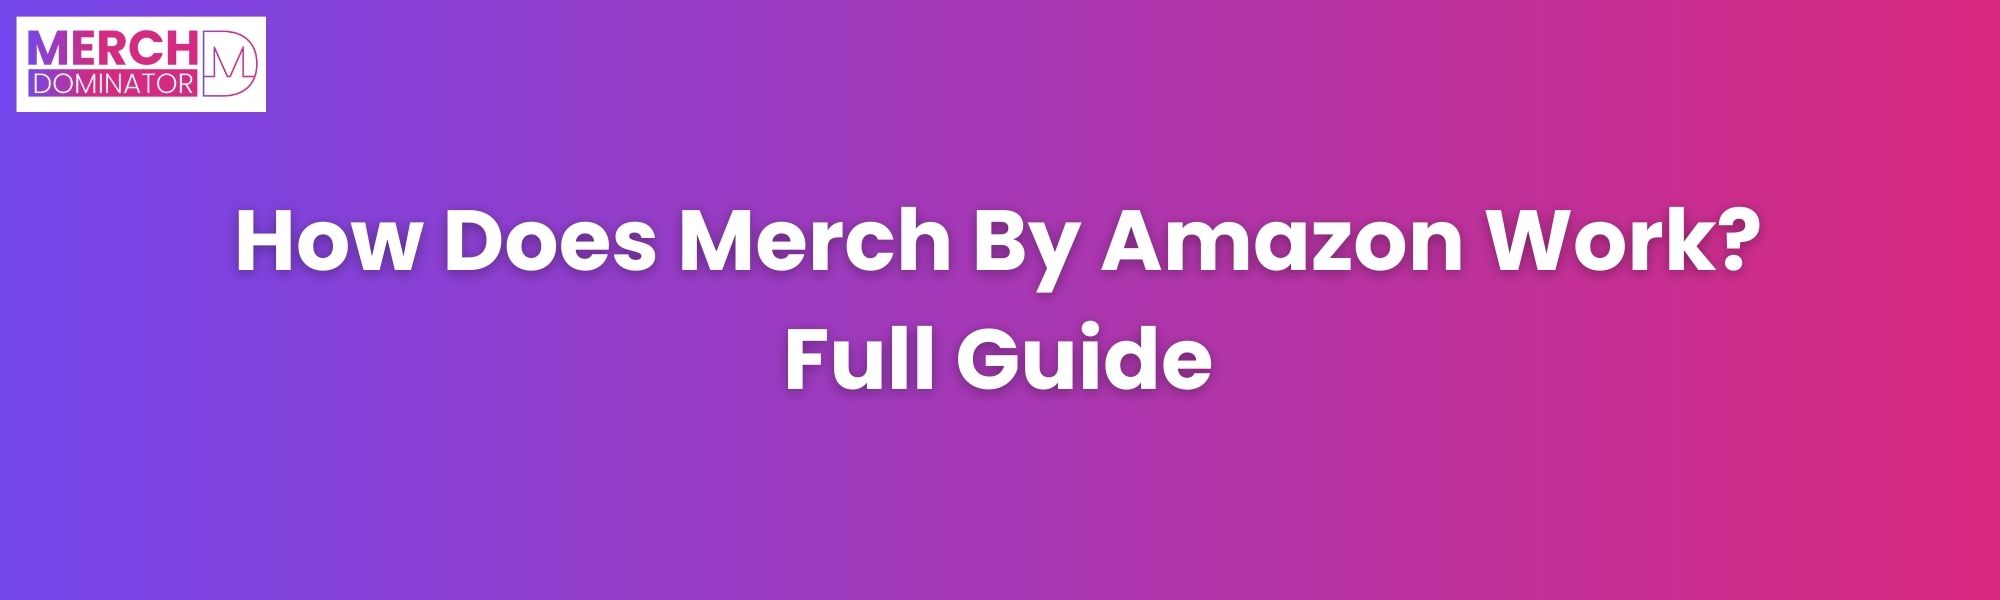 How Does Merch By Amazon Work? Full Guide